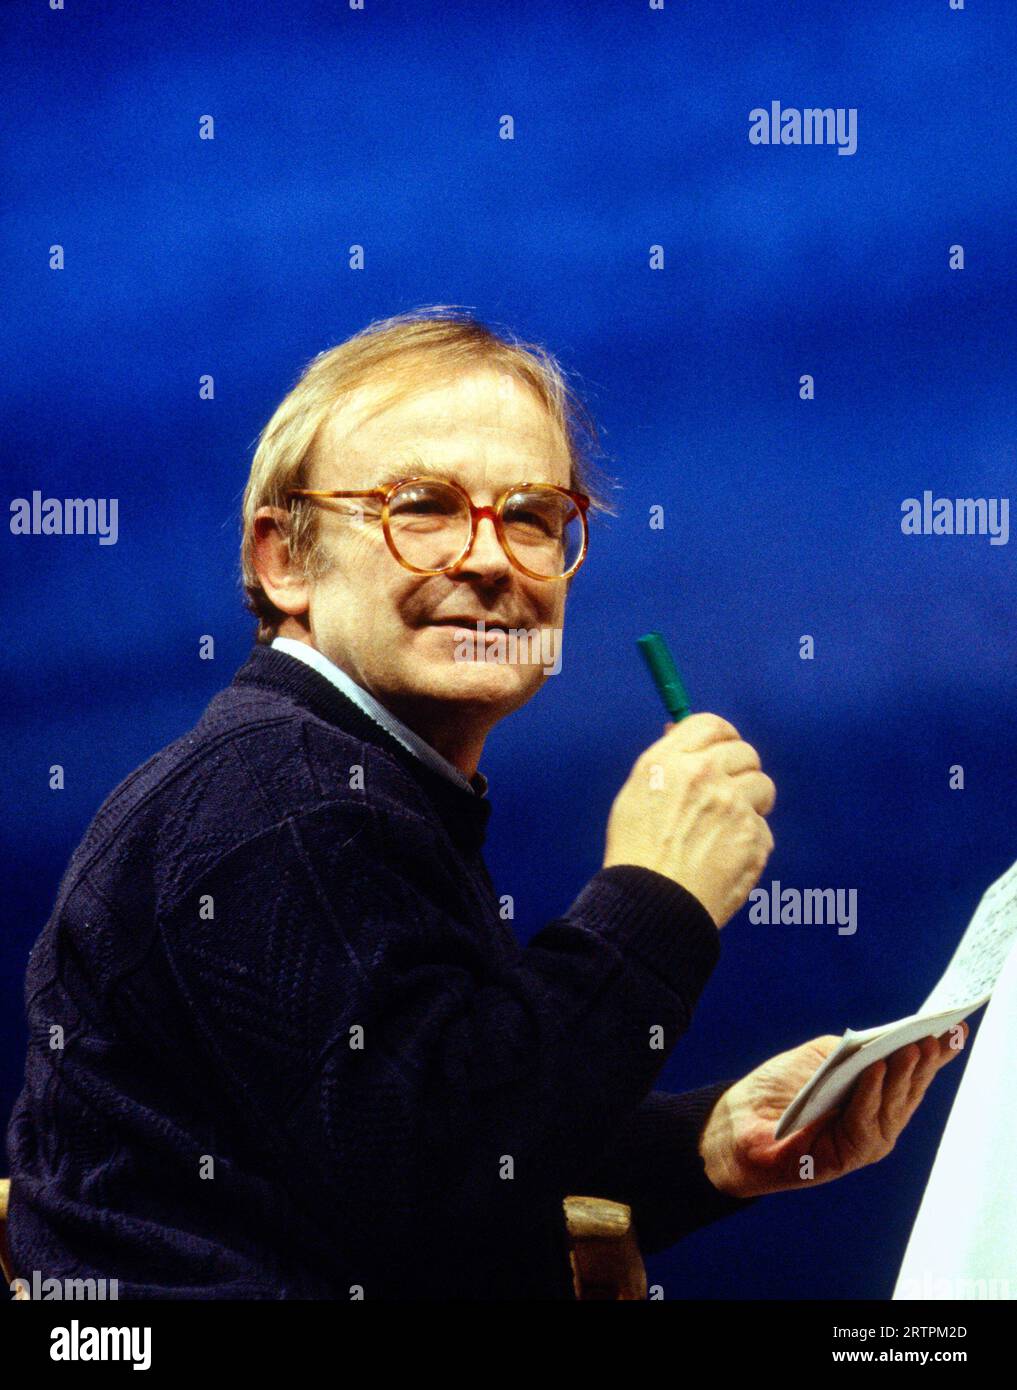 David Wood (1944- ), children’s dramatist, stage director and producer at a press photo call for THE BFG by Roald Dahl at the Albery Theatre, London WC2 in November 1993 Stock Photo